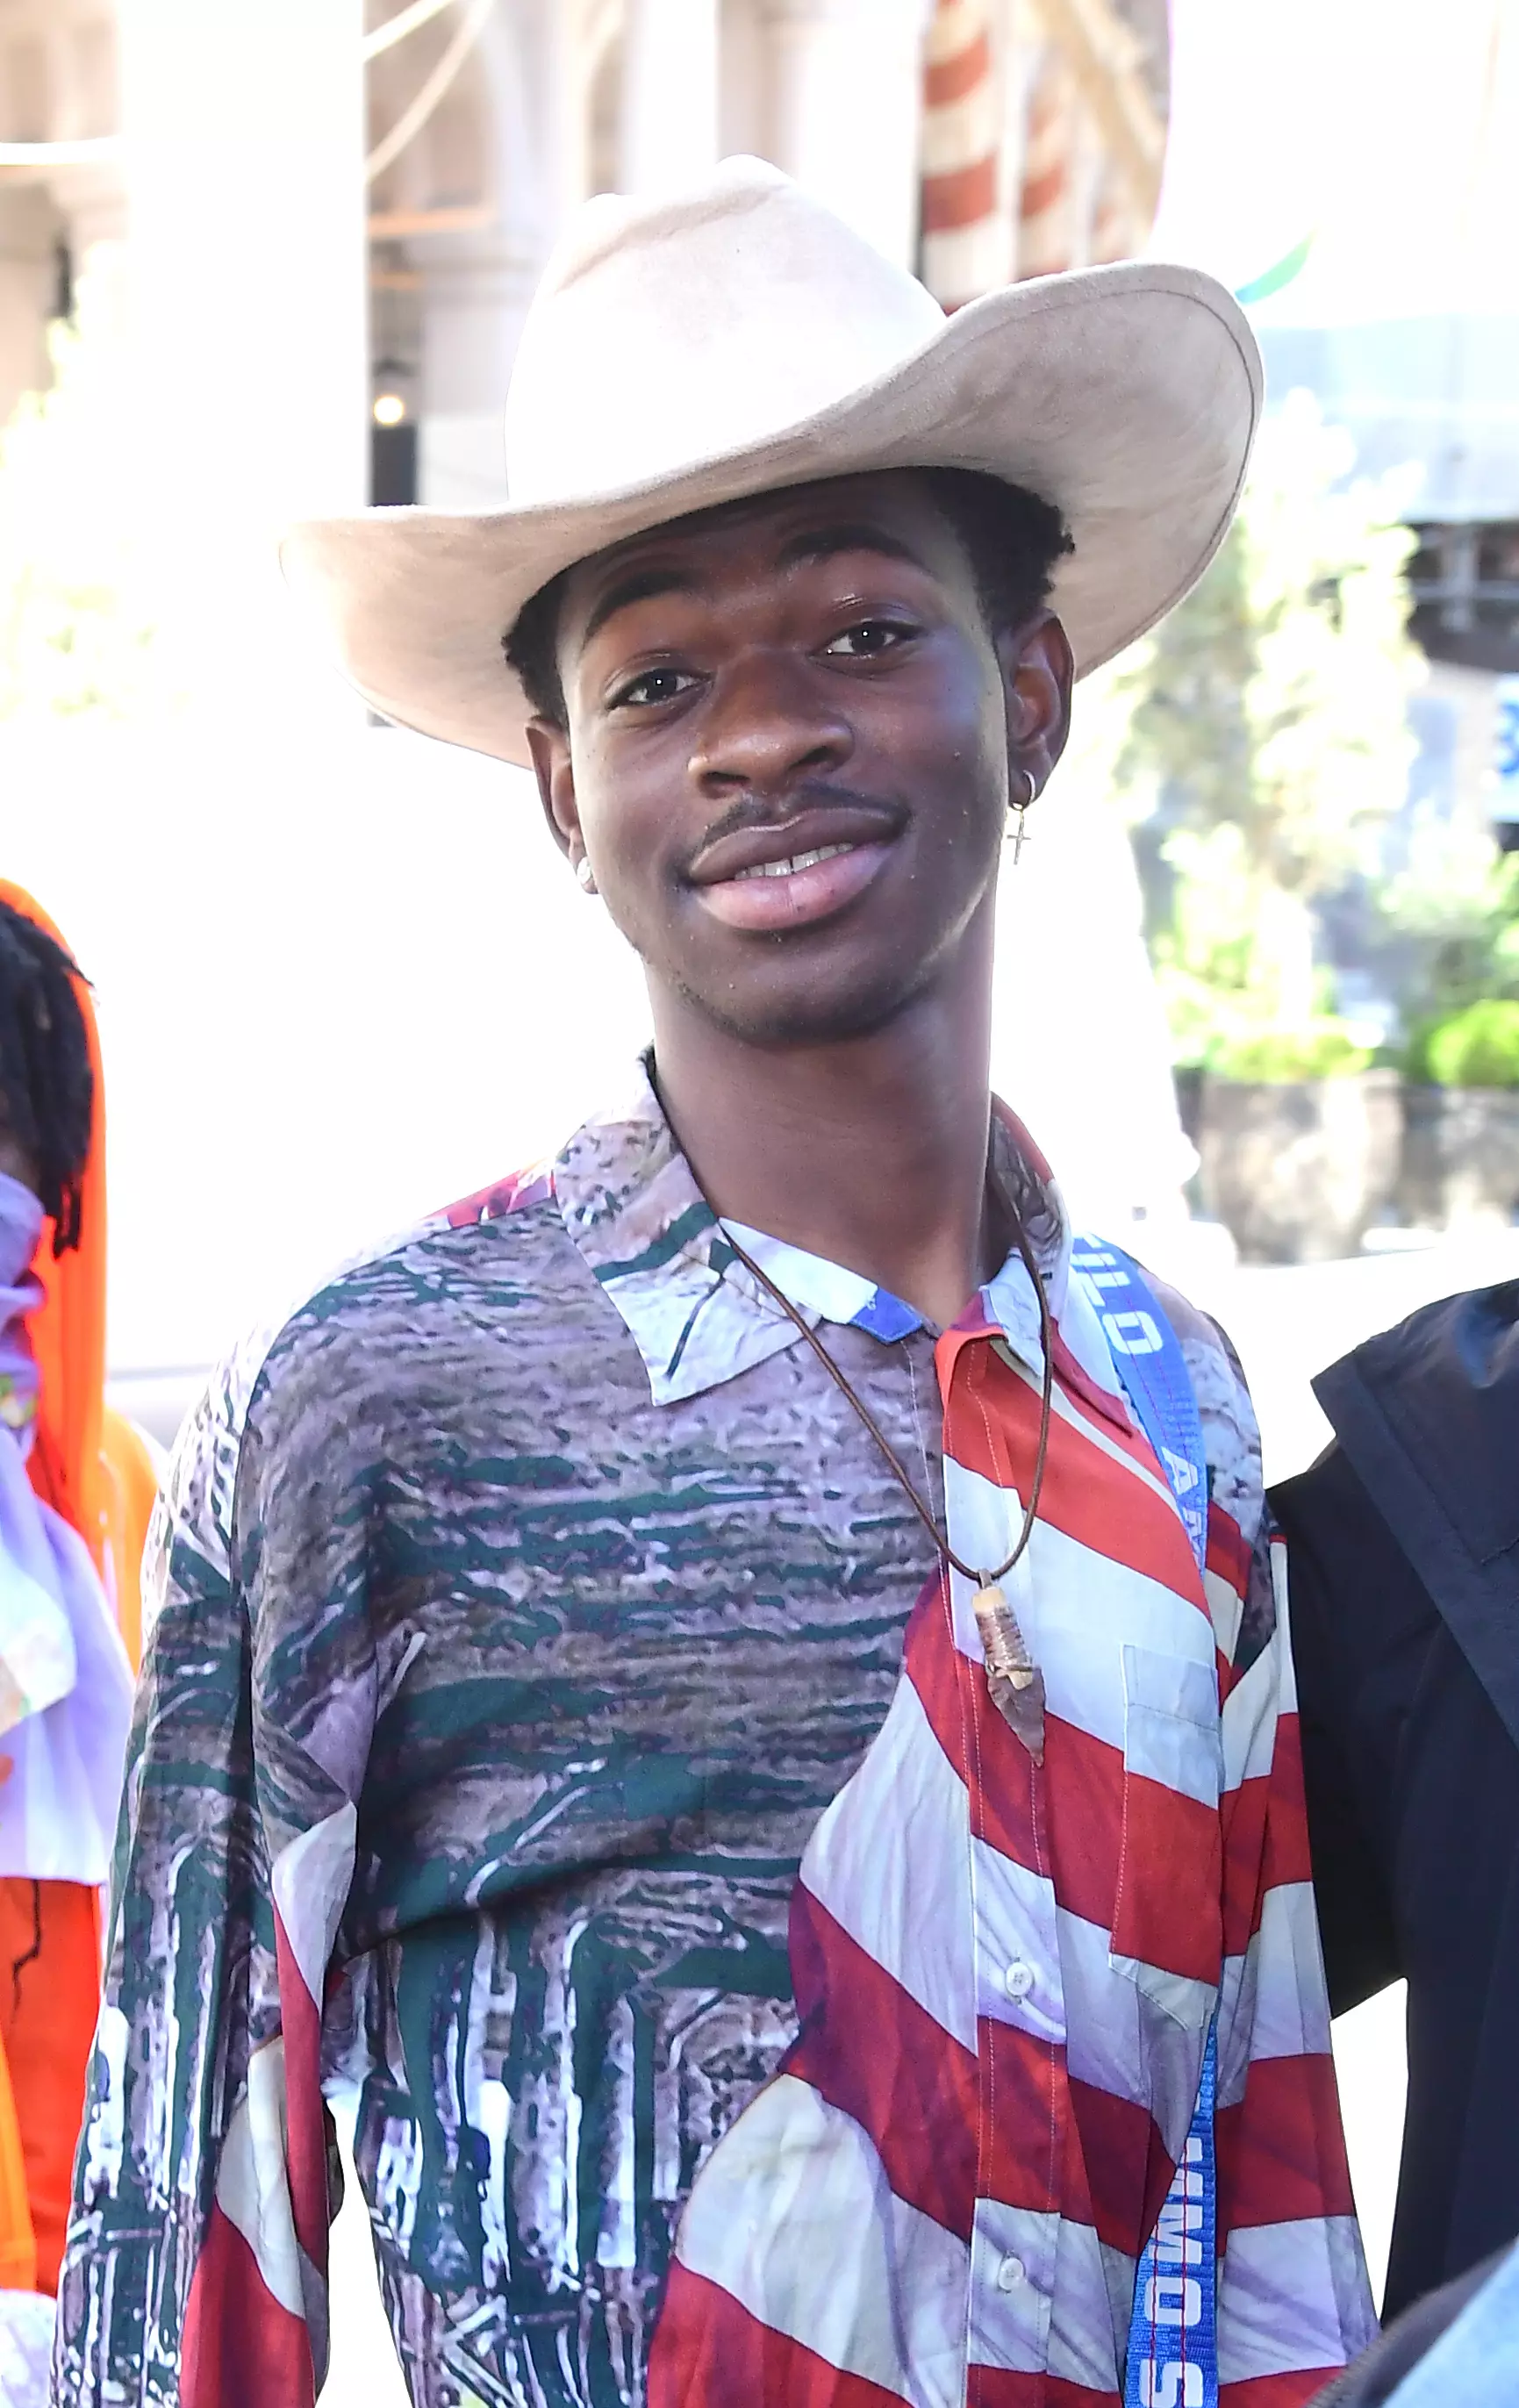 Lil Nas X combines country music with rap